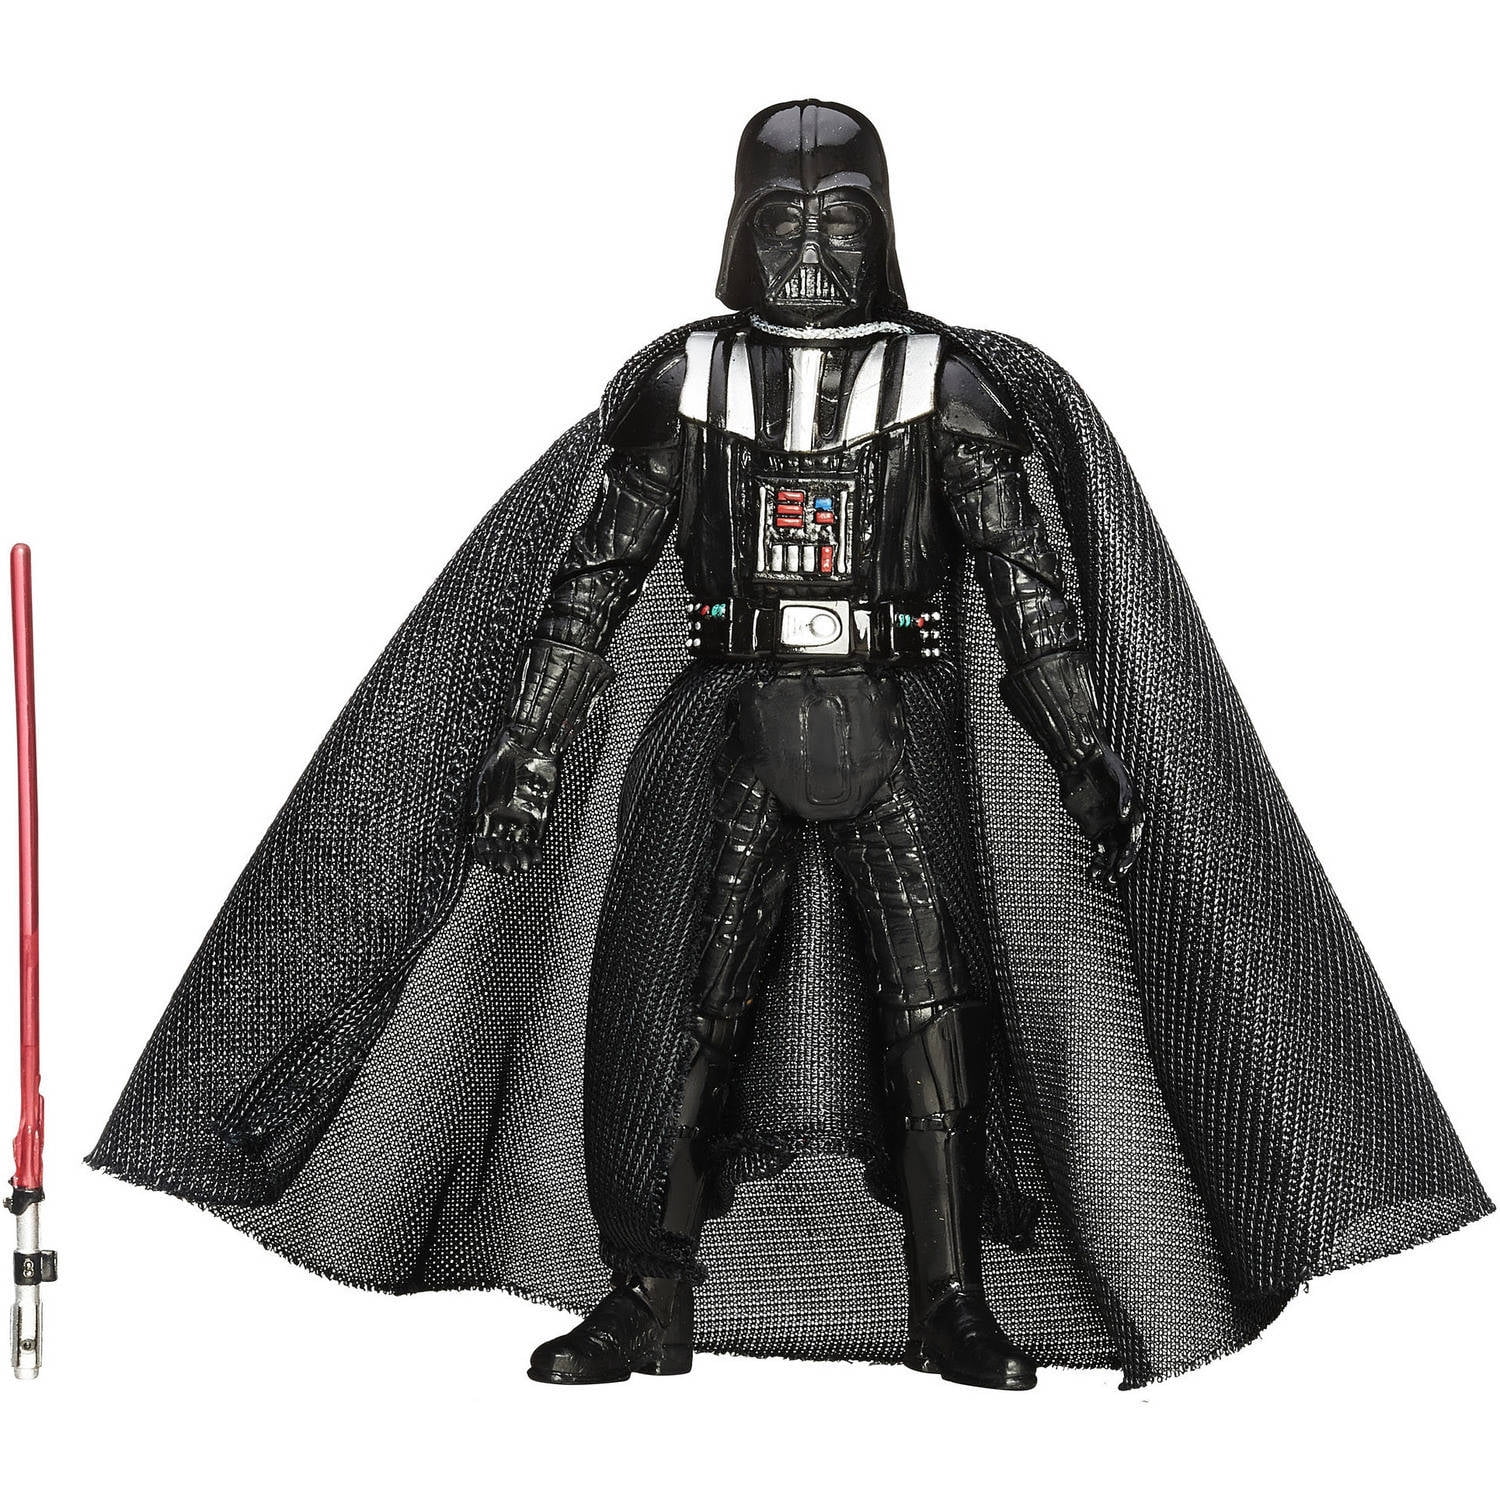 3.75" Star Wars Series Darth Vader Action  Figure  with light sword Toy 